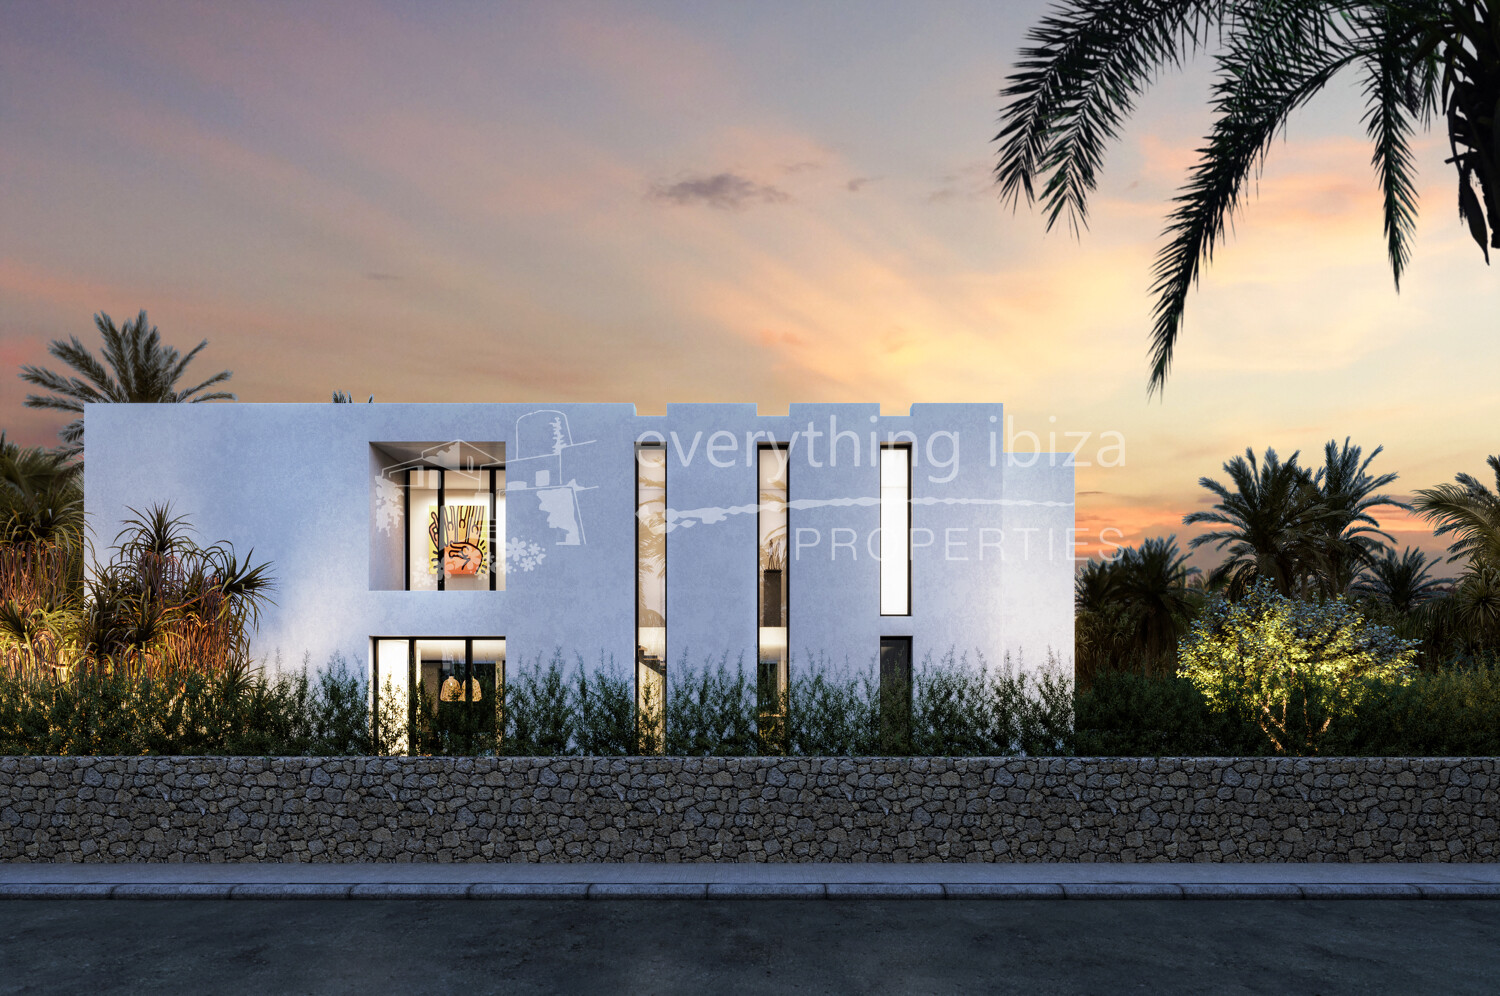 Brand New Luxury Villa in the Sought After Talamanca Area, ref. 1619, for sale in Ibiza by everything ibiza Properties